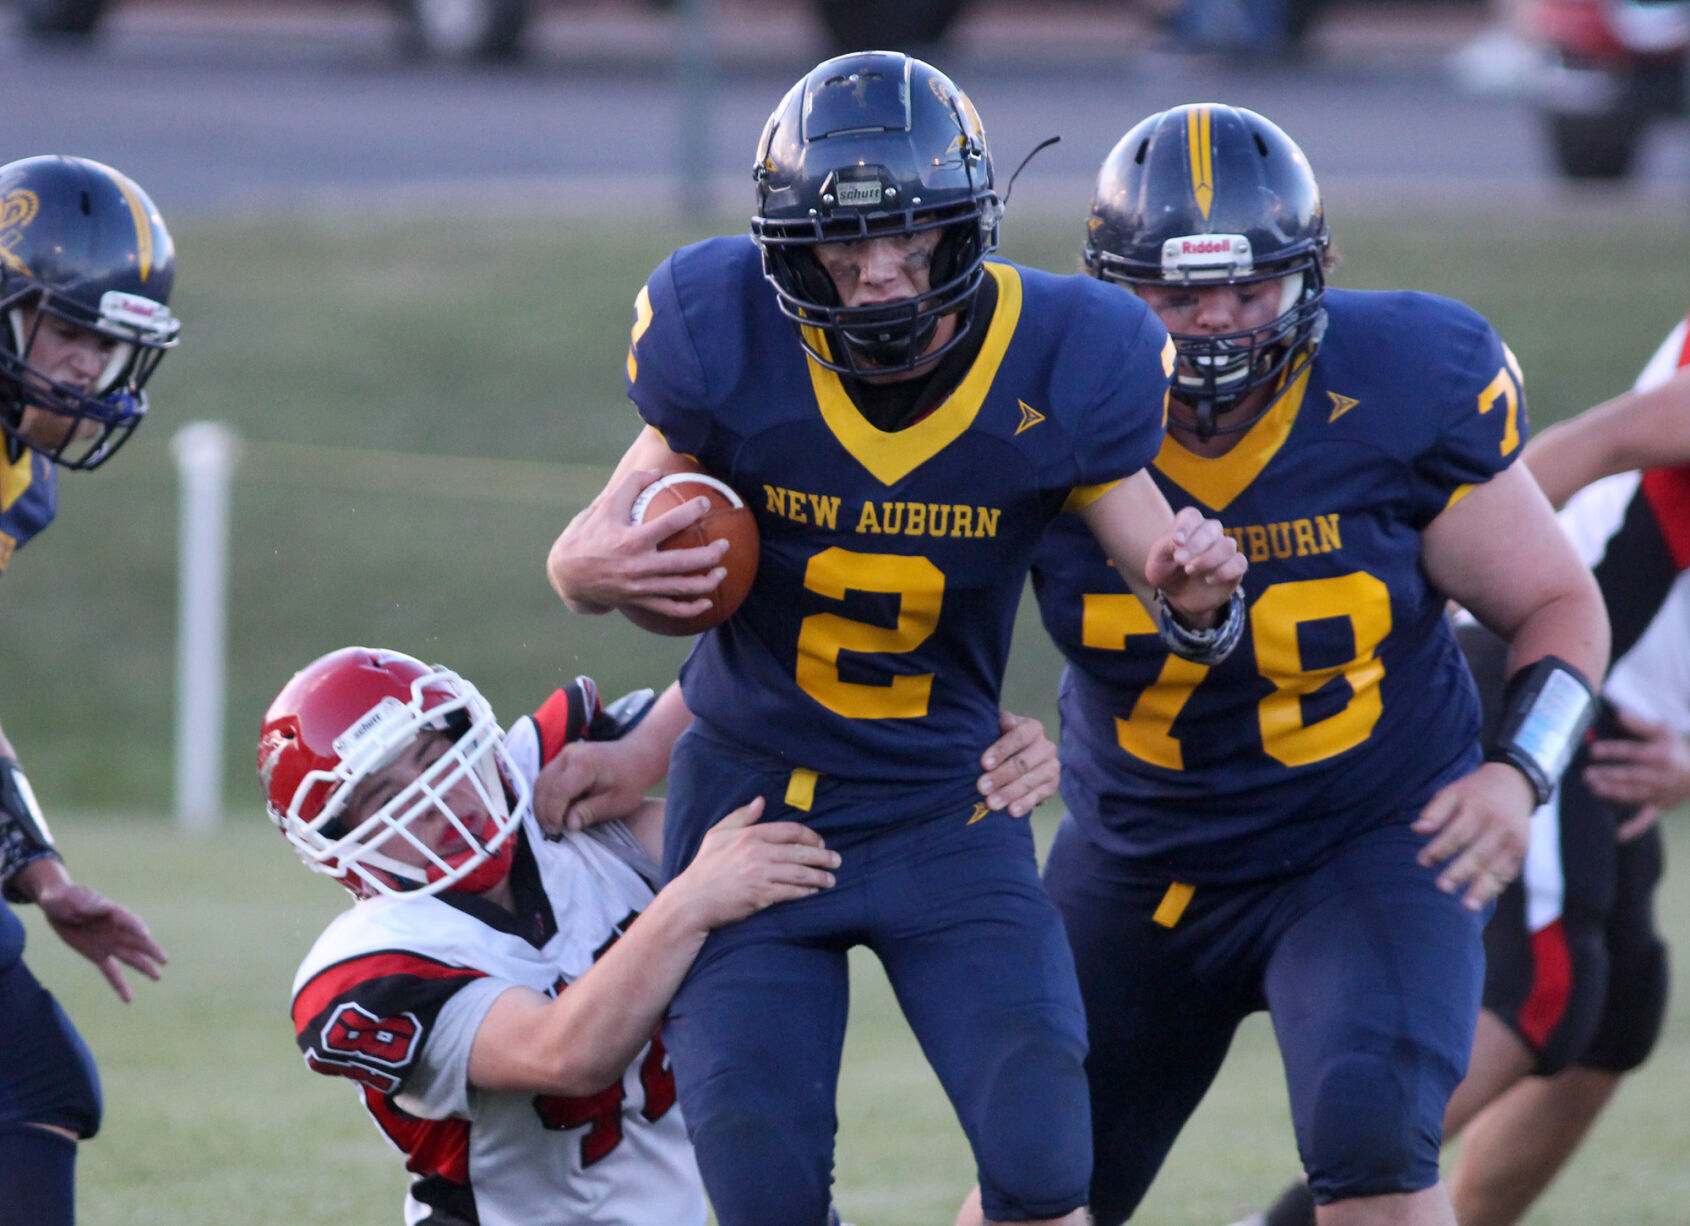 Latest Football Scores, Standings, and Rankings in Wisconsin – Hudson, New Richmond, and Menomonie Leading Divisions